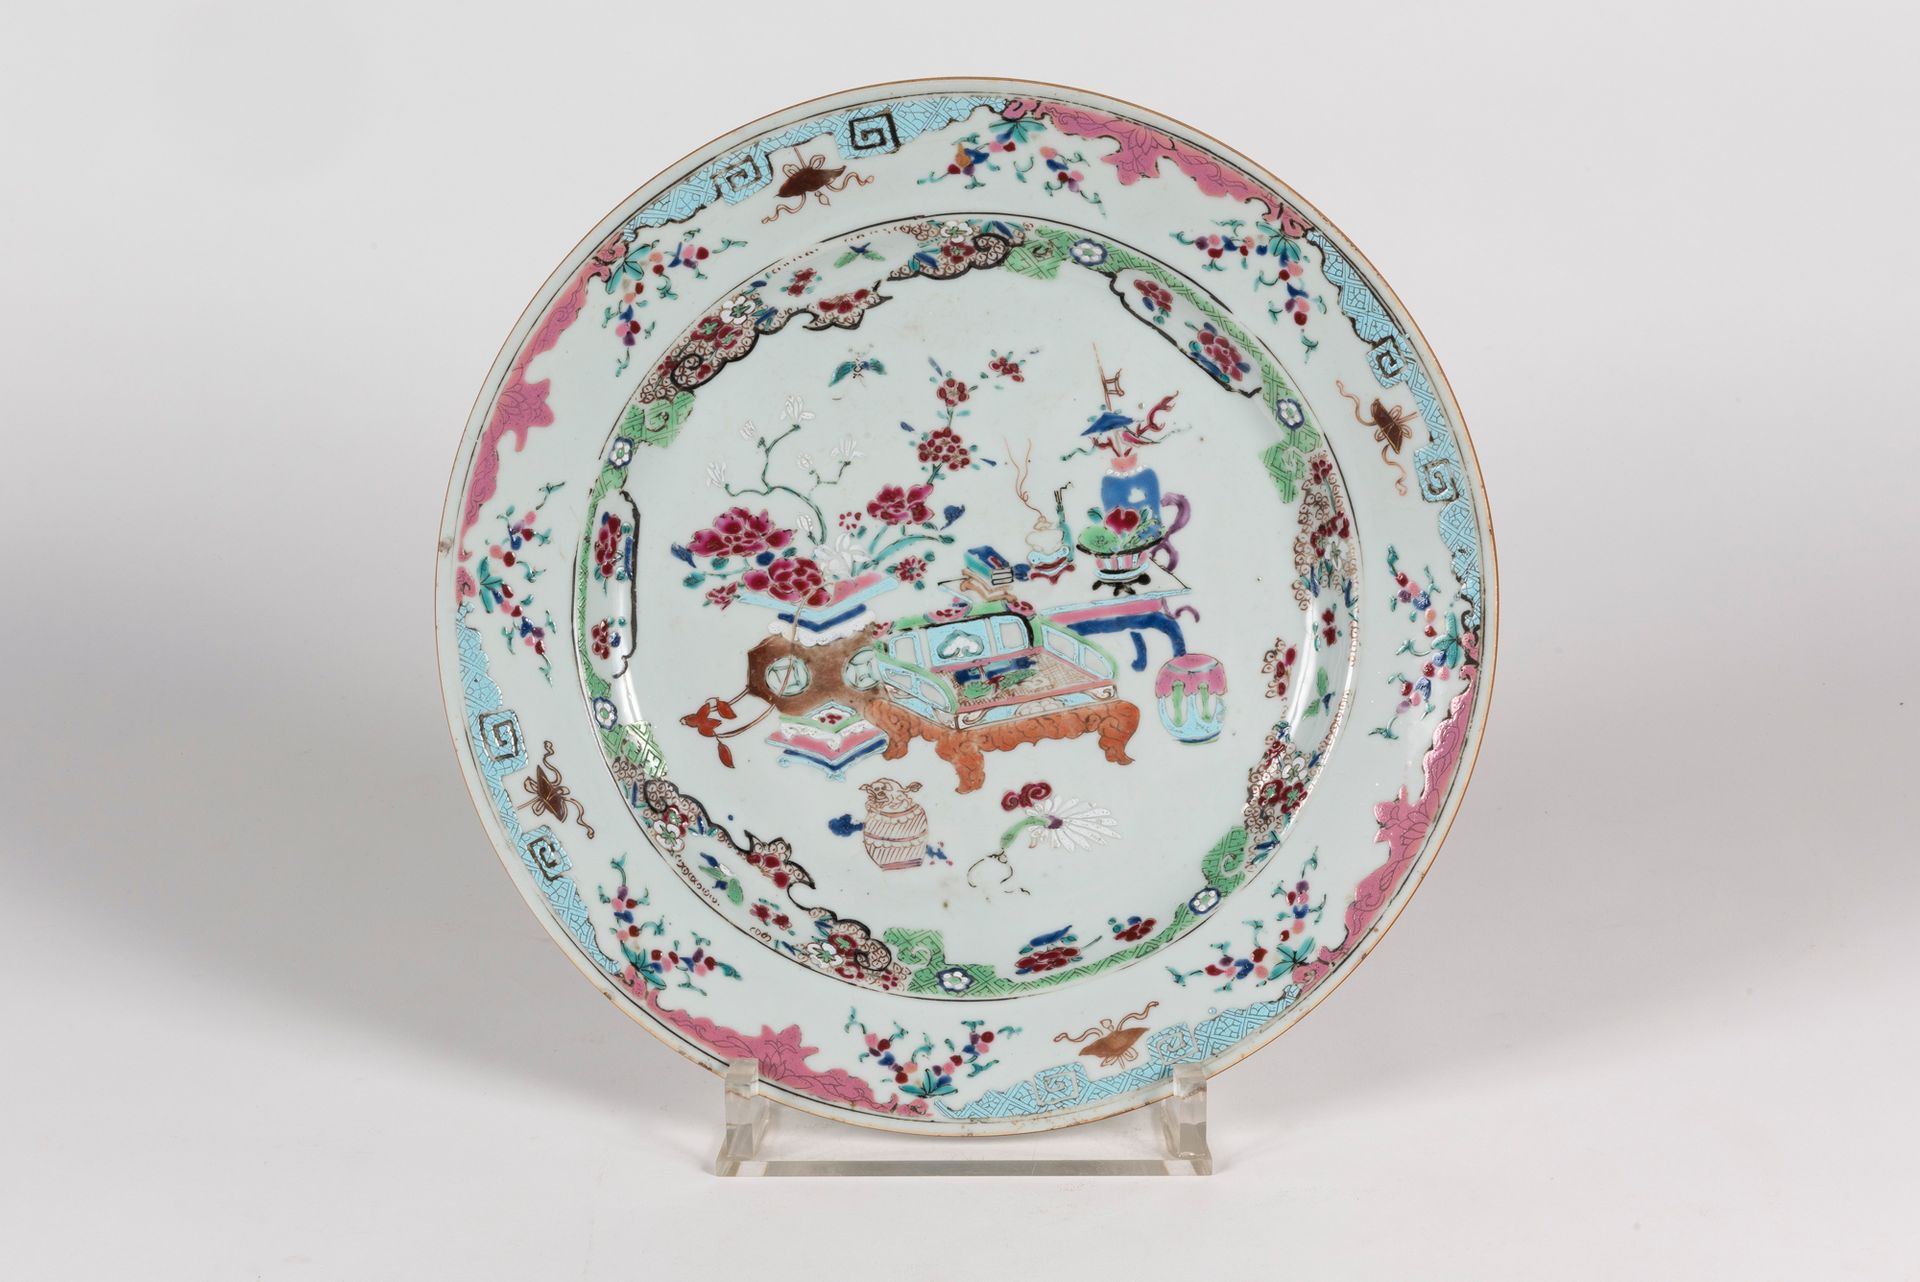 Null PLAT
Painted in famille rose enamels with furniture objects.
China, Yongzhe&hellip;